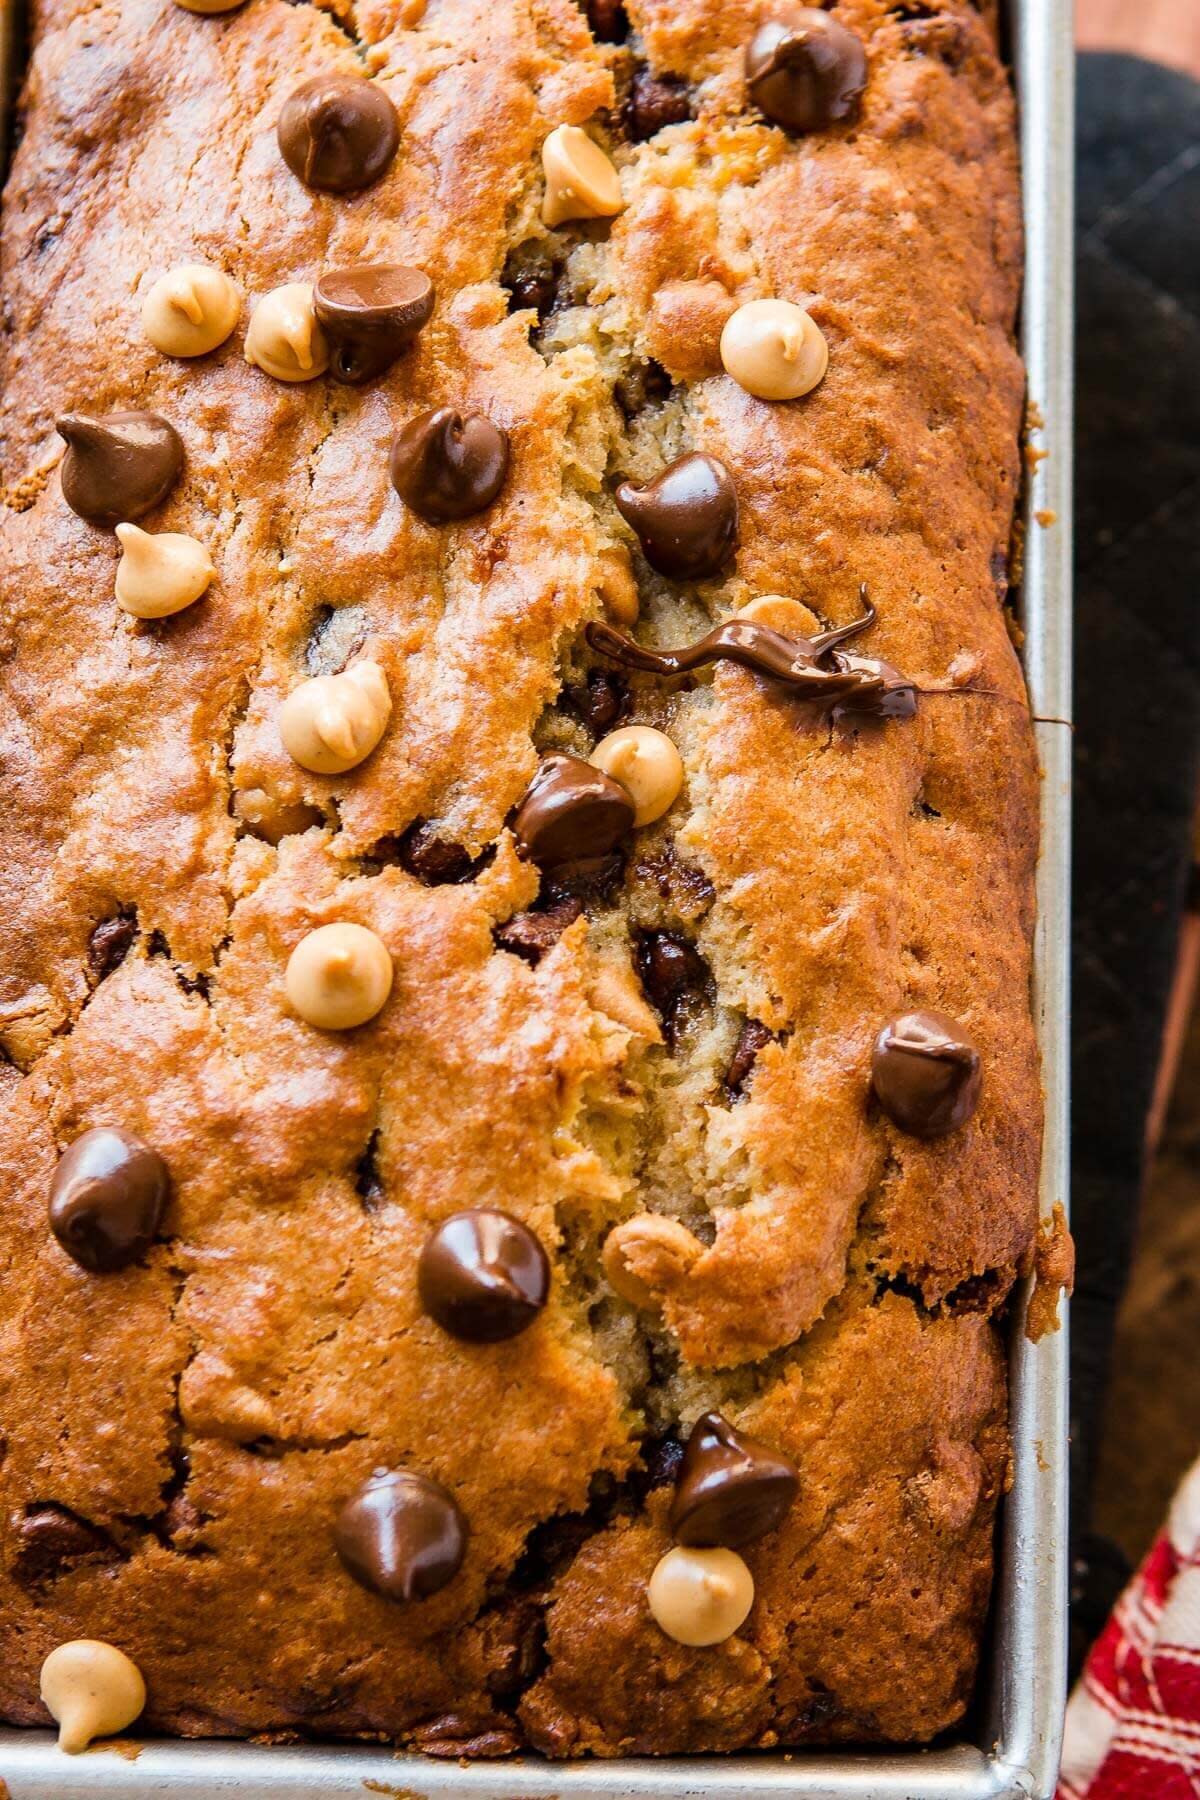 <a href="https://ohsweetbasil.com/peanut-butter-banana-bread/" target="_blank" rel="noopener noreferrer"><strong>Get the Peanut Butter Banana Bread recipe from Oh Sweet Basil</strong></a>